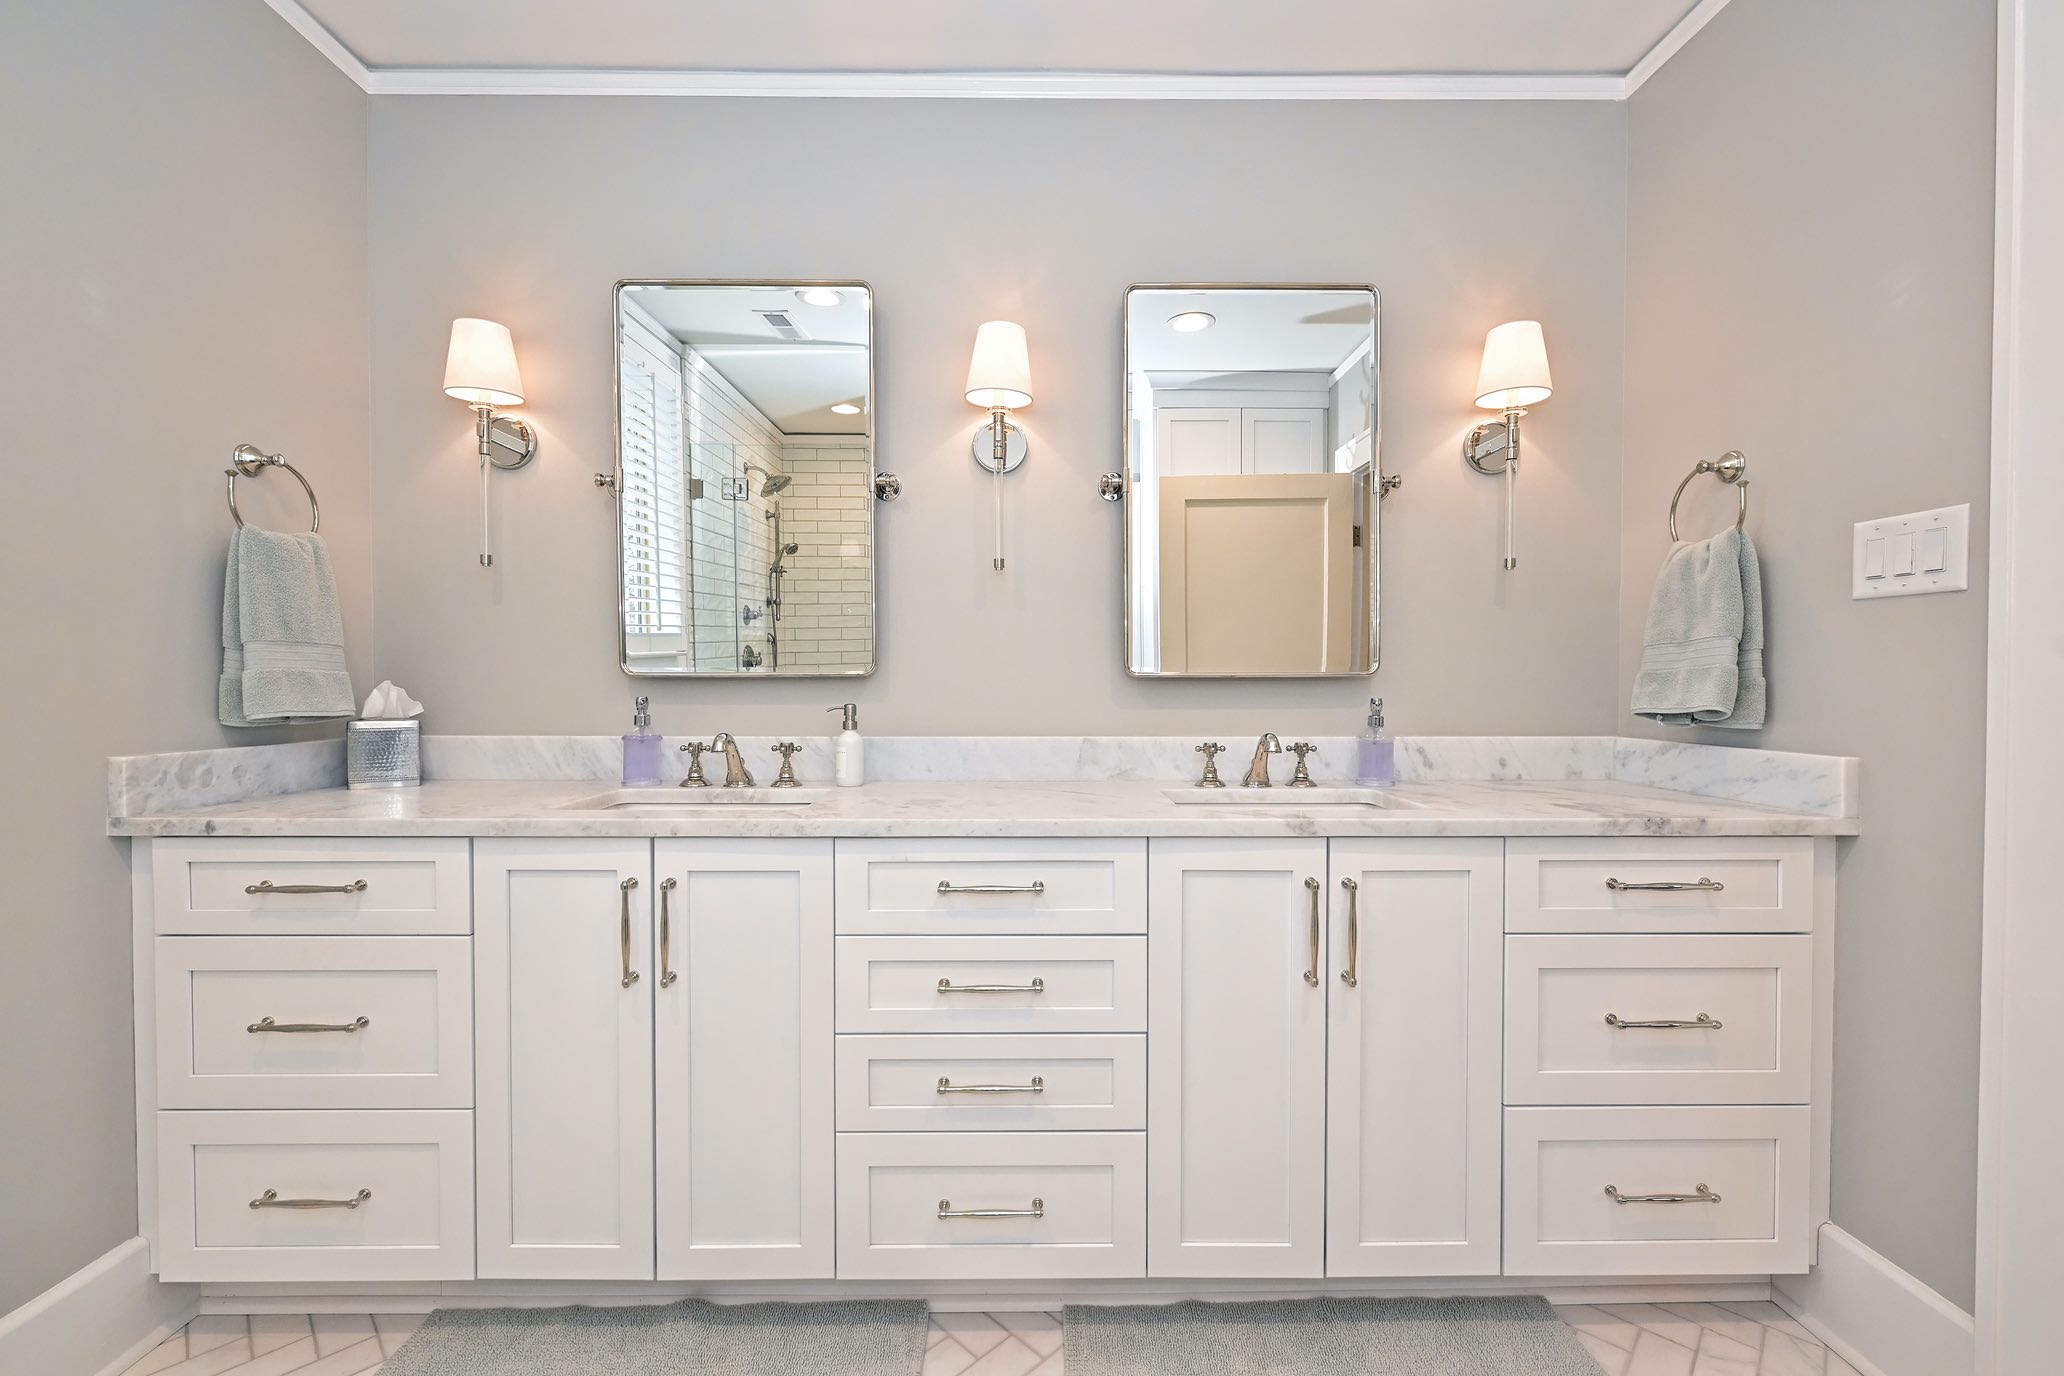 How Much Does a Bathroom Remodel Cost?